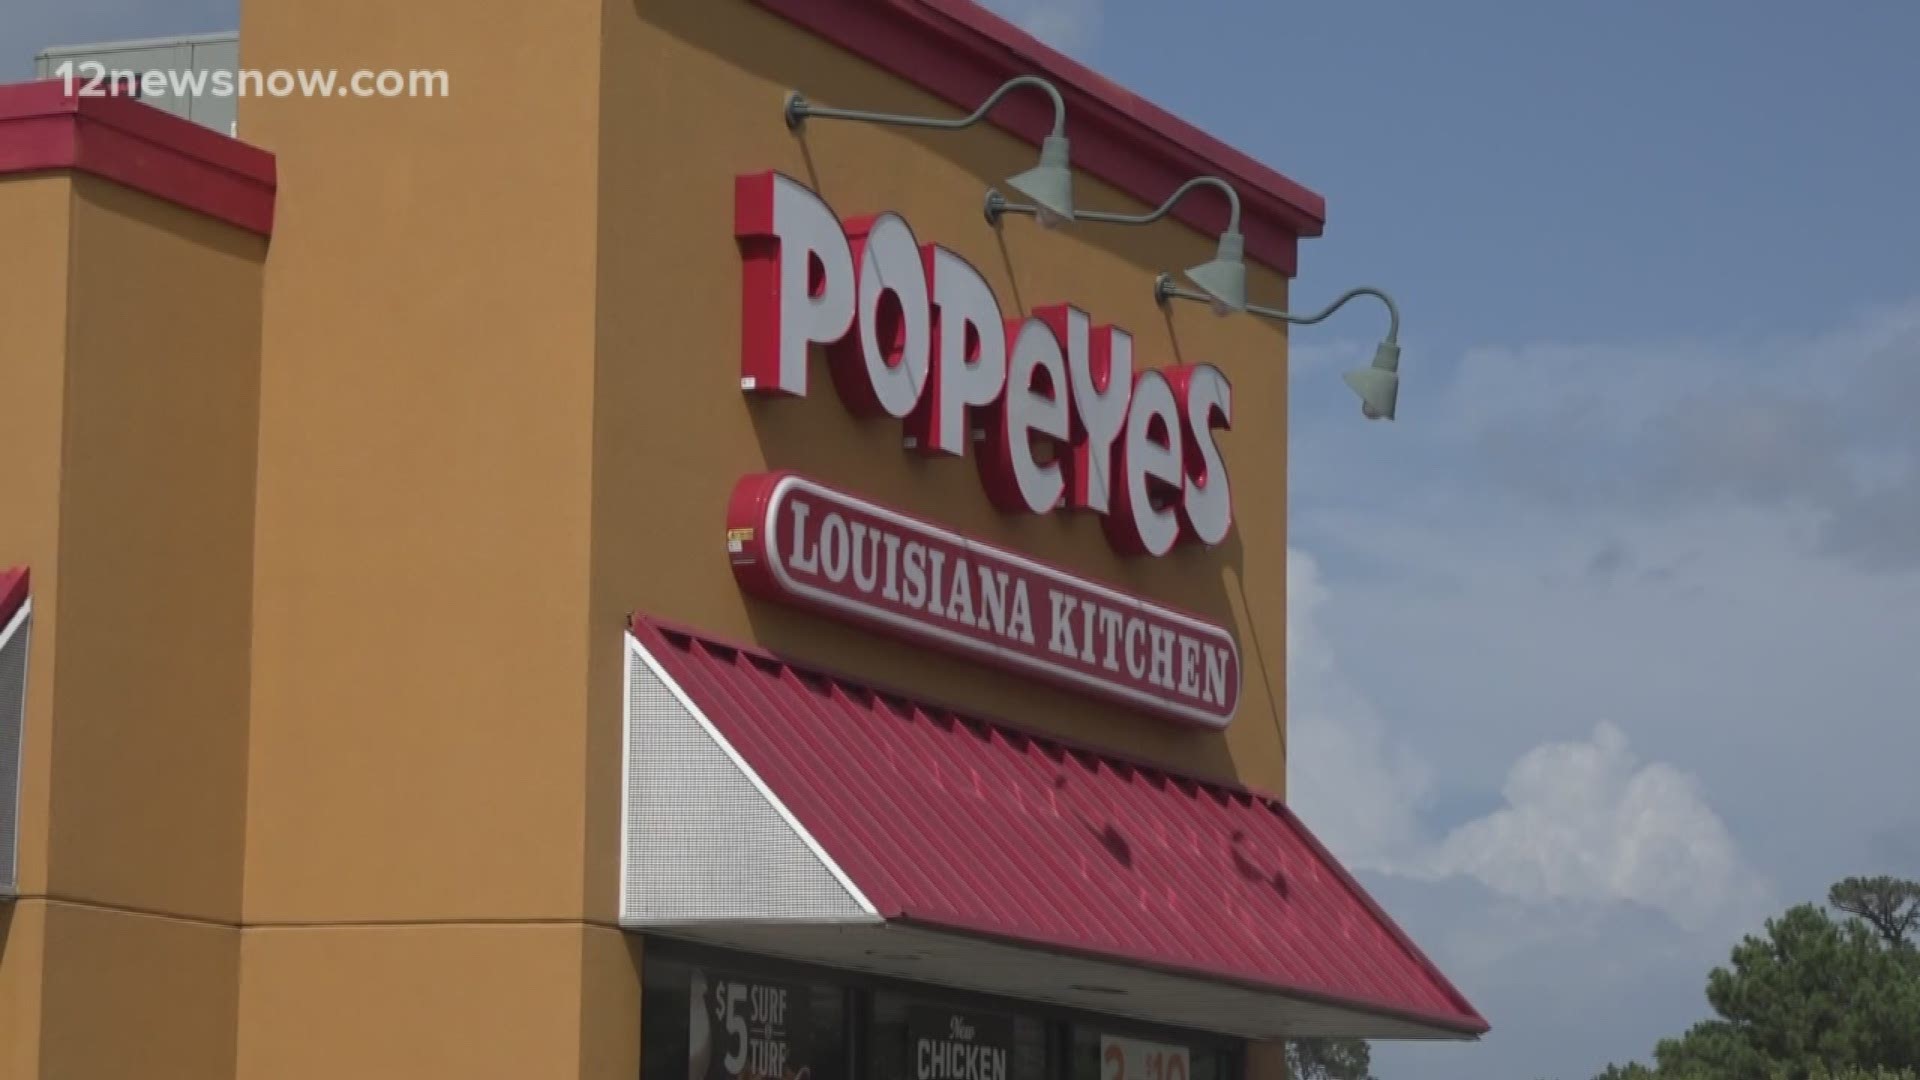 Some were unable to get their hands on the Popeye's chicken sandwich on Wednesday.